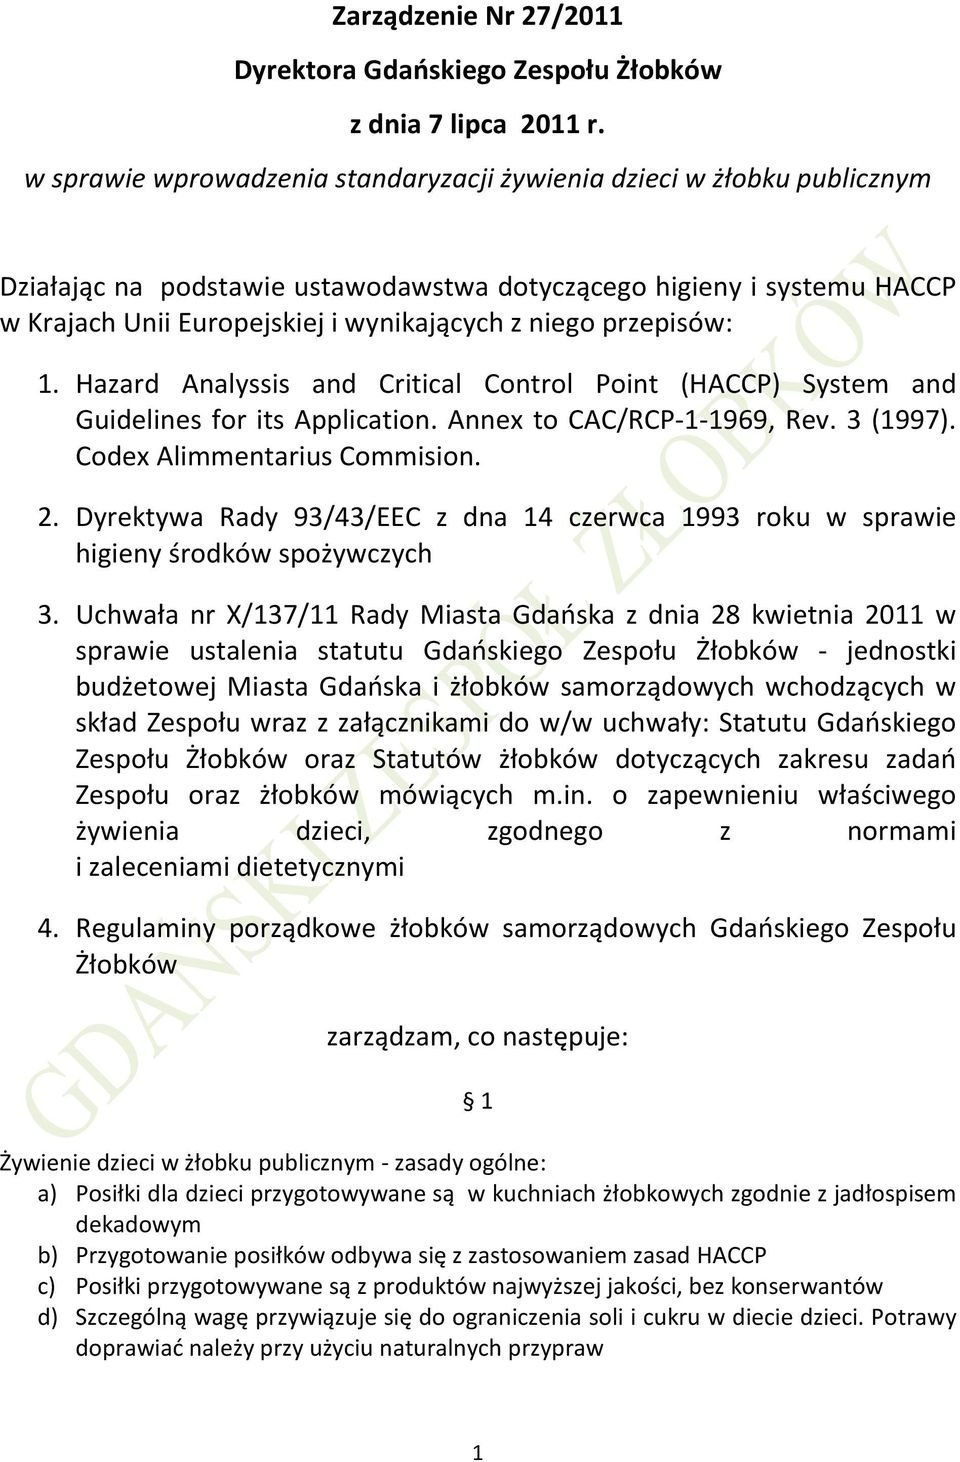 przepisów: 1. Hazard Analyssis and Critical Control Point (HACCP) System and Guidelines for its Application. Annex to CAC/RCP-1-1969, Rev. 3 (1997). Codex Alimmentarius Commision. 2.